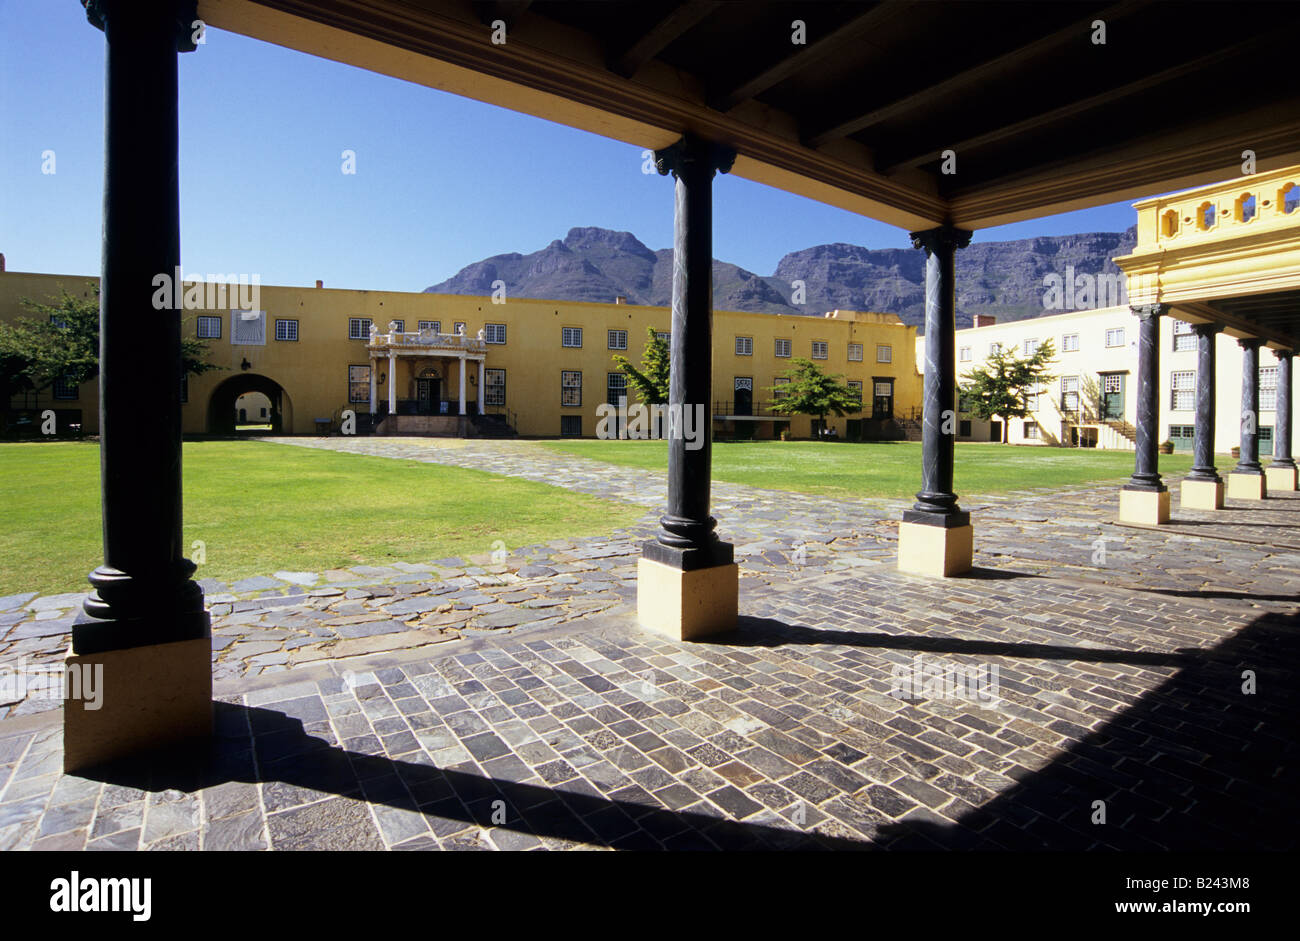 Cape Town, South Africa, history, architecture, buildings, courtyard in Castle of Good Hope, historical fort of Dutch East India Company Stock Photo